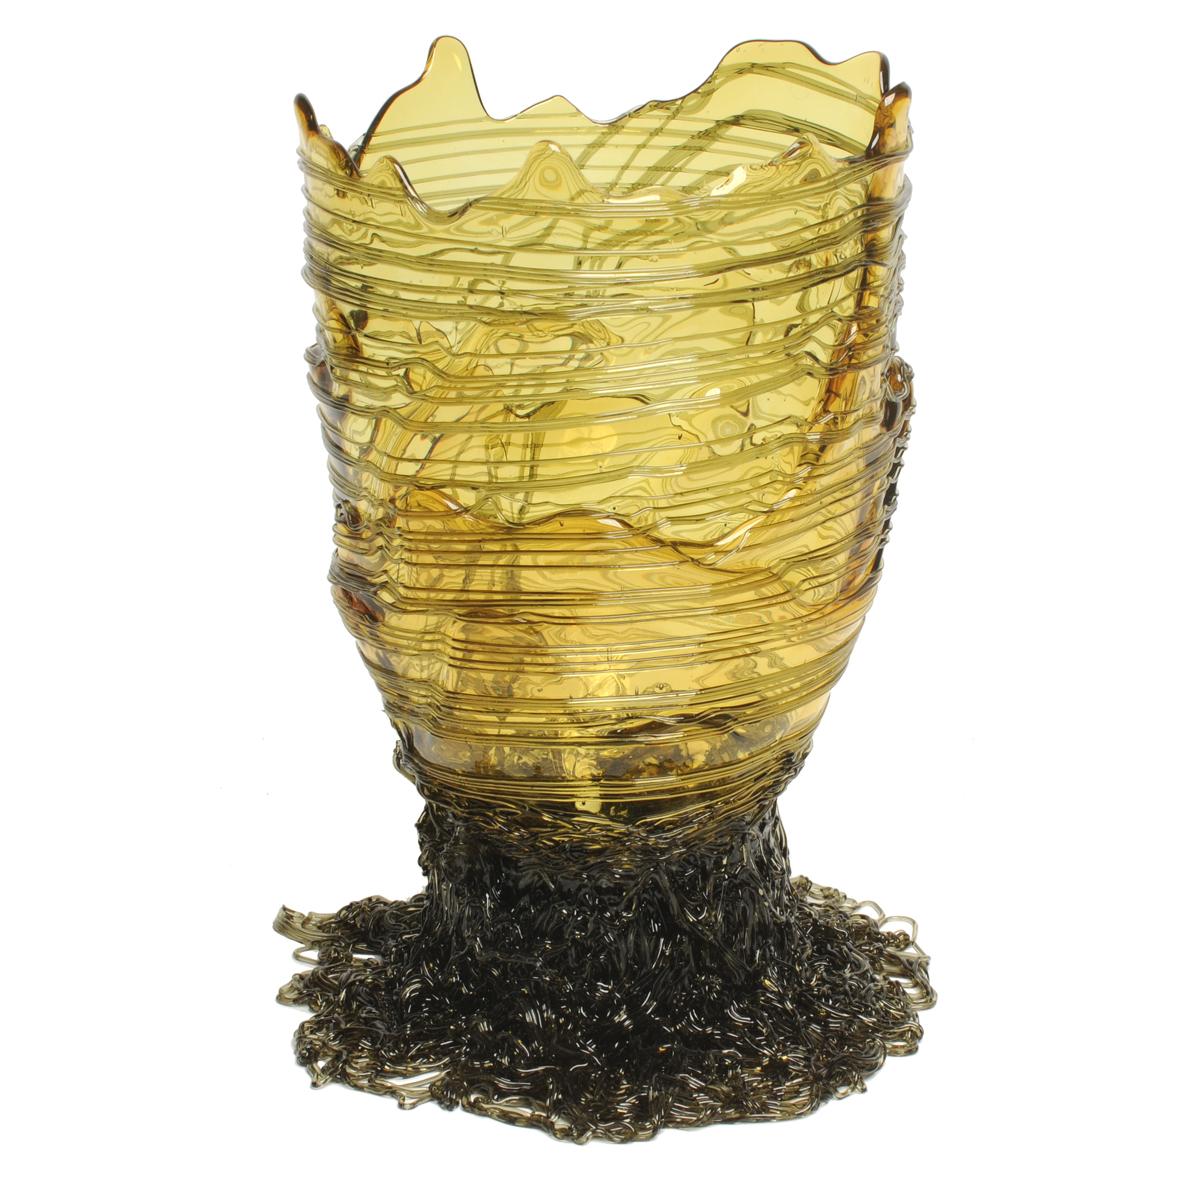 Spaghetti vase, grey, yellow.

Vase in soft resin designed by Gaetano Pesce in 1995 for Fish Design collection.

Measures: L ø 22cm x H 36cm

Other sizes available.

Colours: Grey, yellow.
Vase in soft resin designed by Gaetano Pesce in